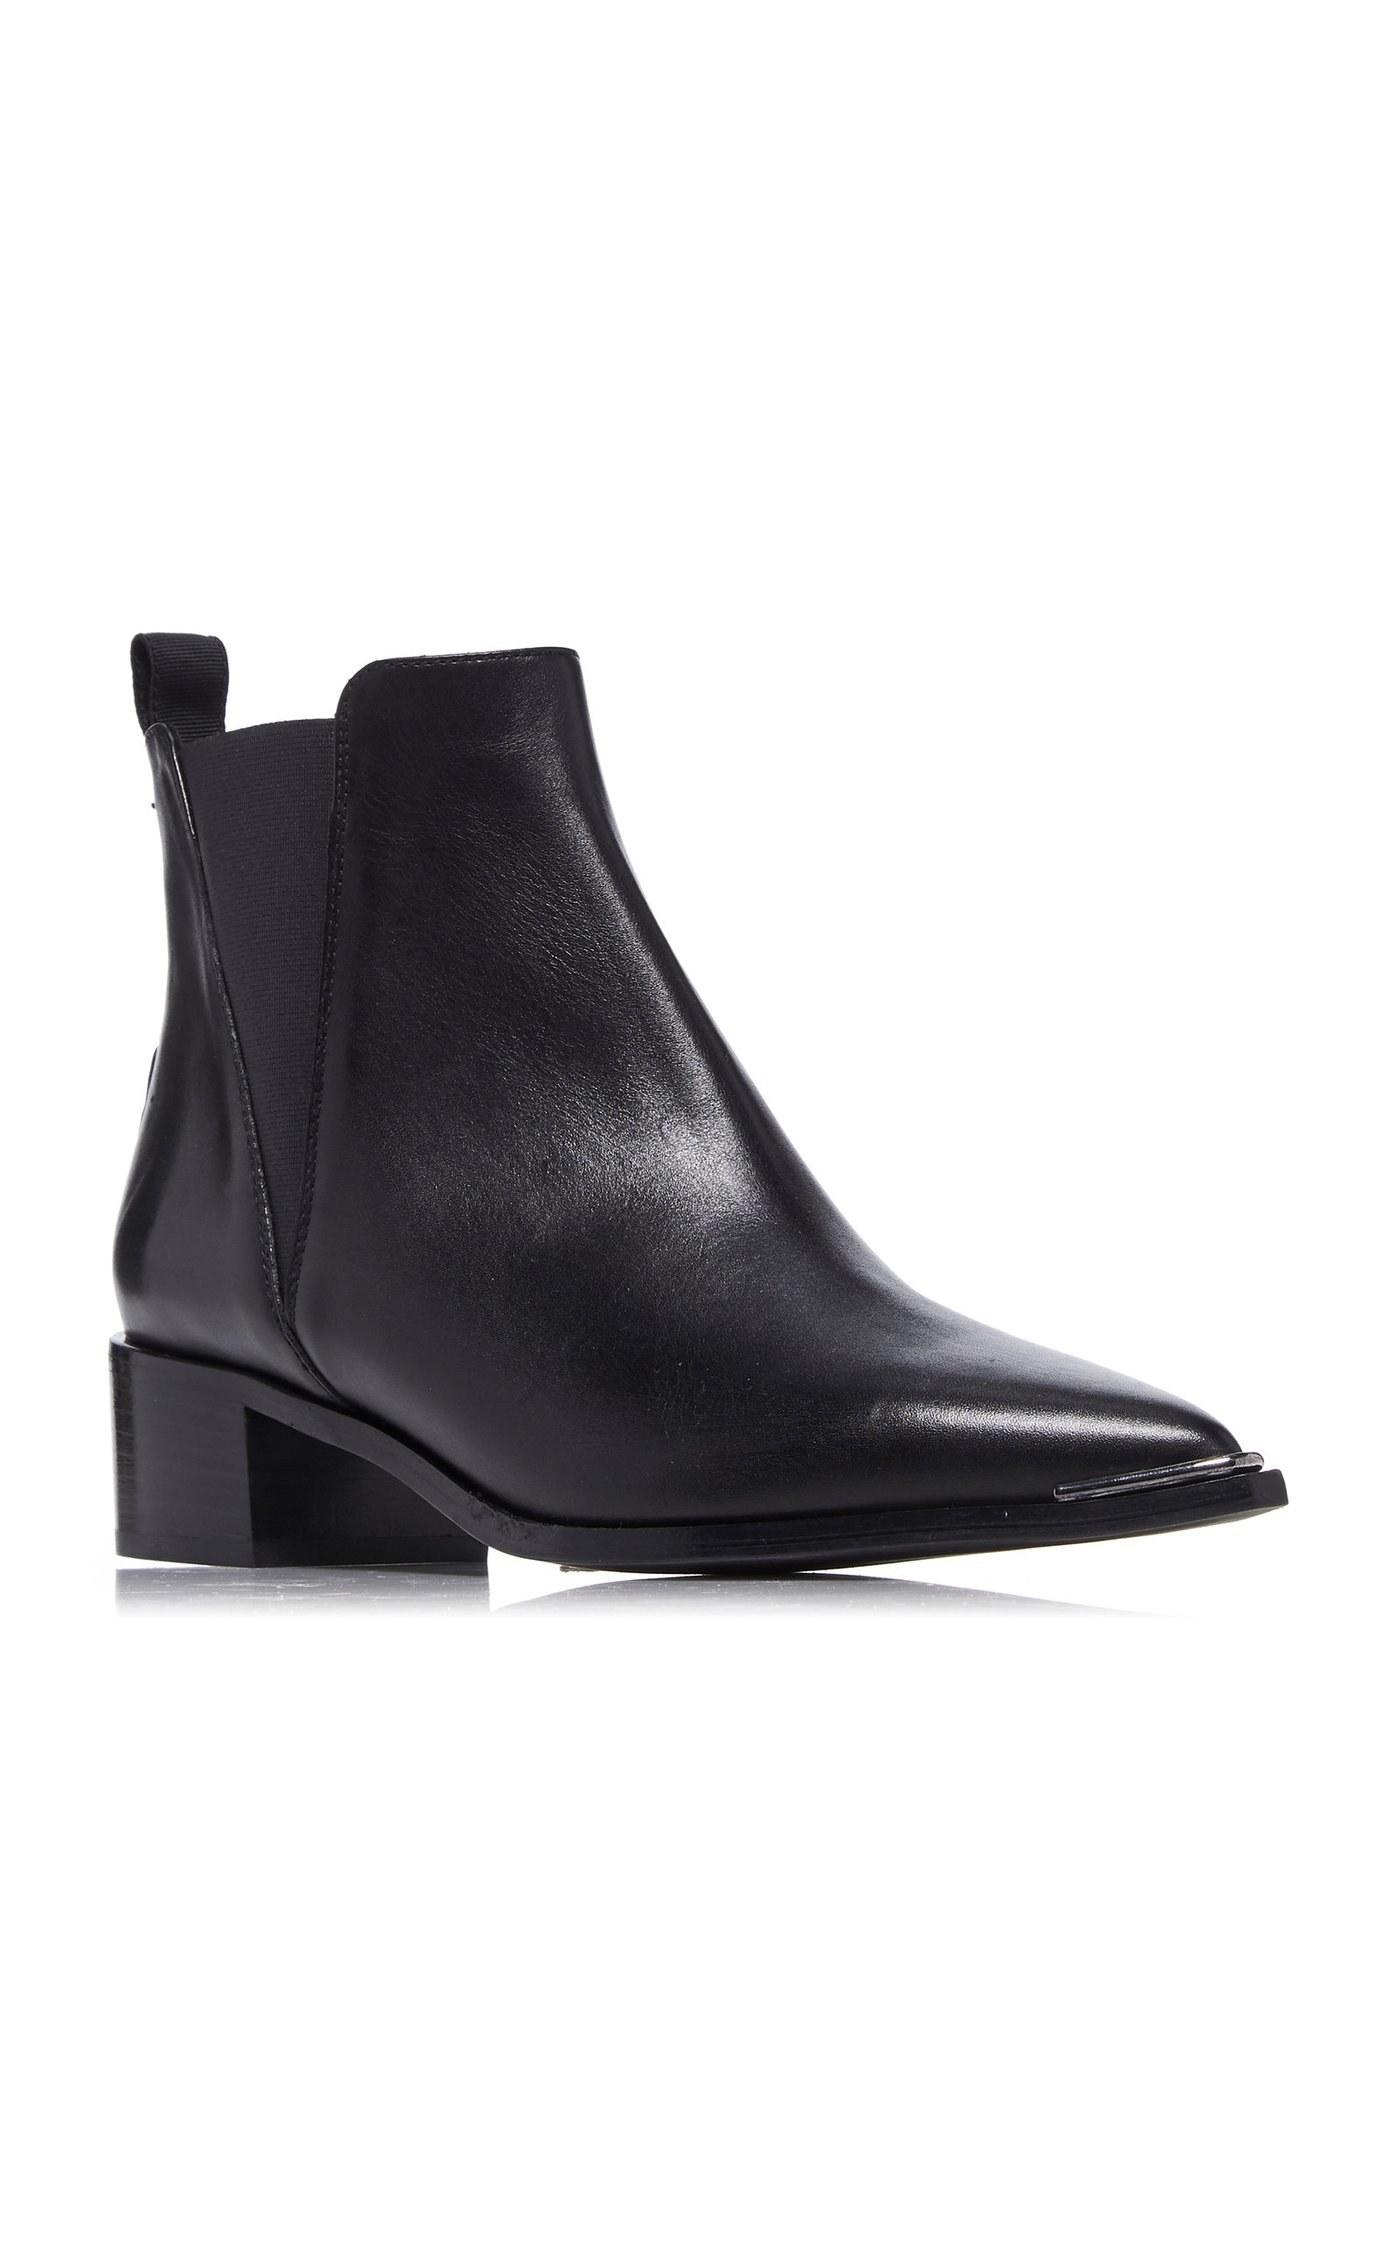 35 Gorgeous Boots You'll Want To Wear All Year Long